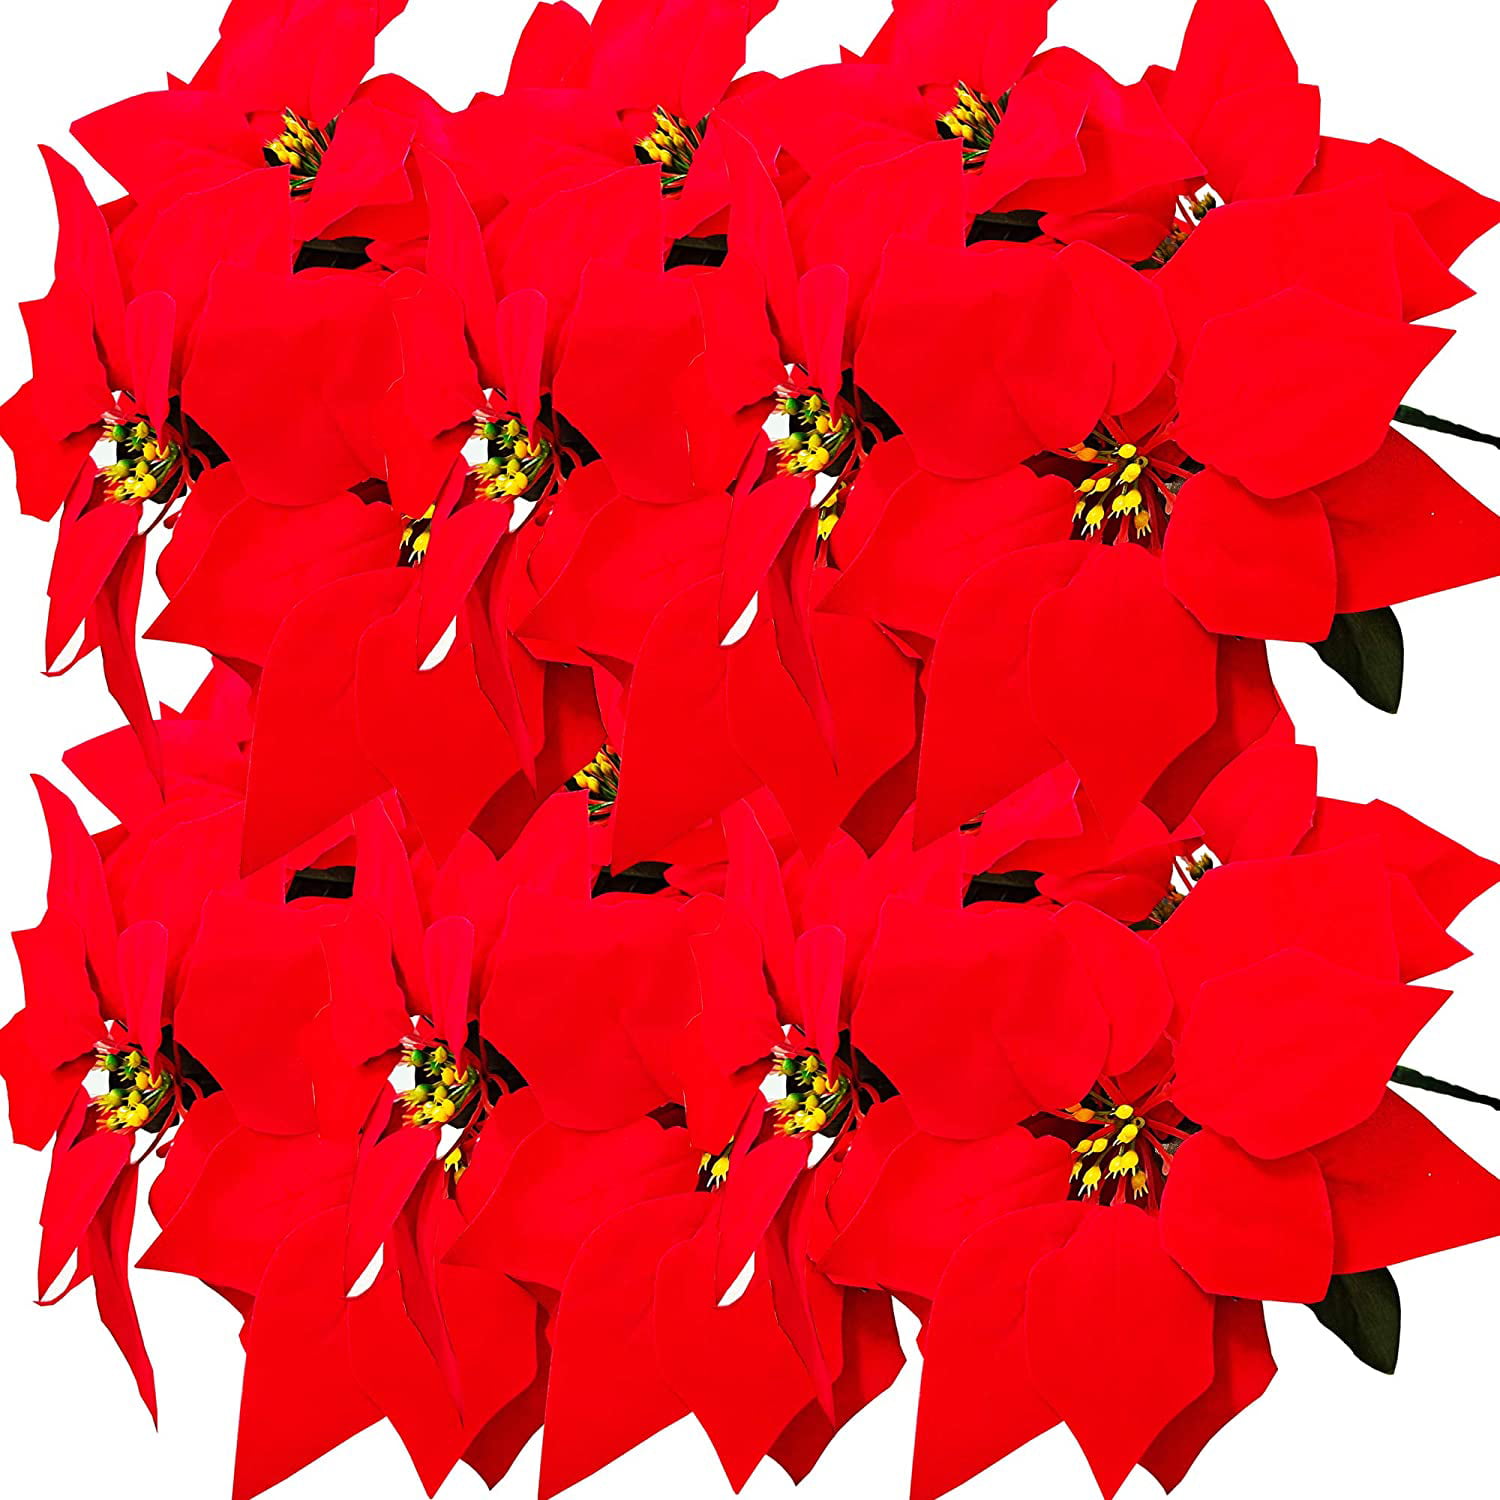 MELAJIA Artificial Christmas Flowers Red 7 Heads Velvet Poinsettia Floral  Bouquet Festival Holiday Decorations Indoor or Outdoor (Pack of 6) -  Walmart.com